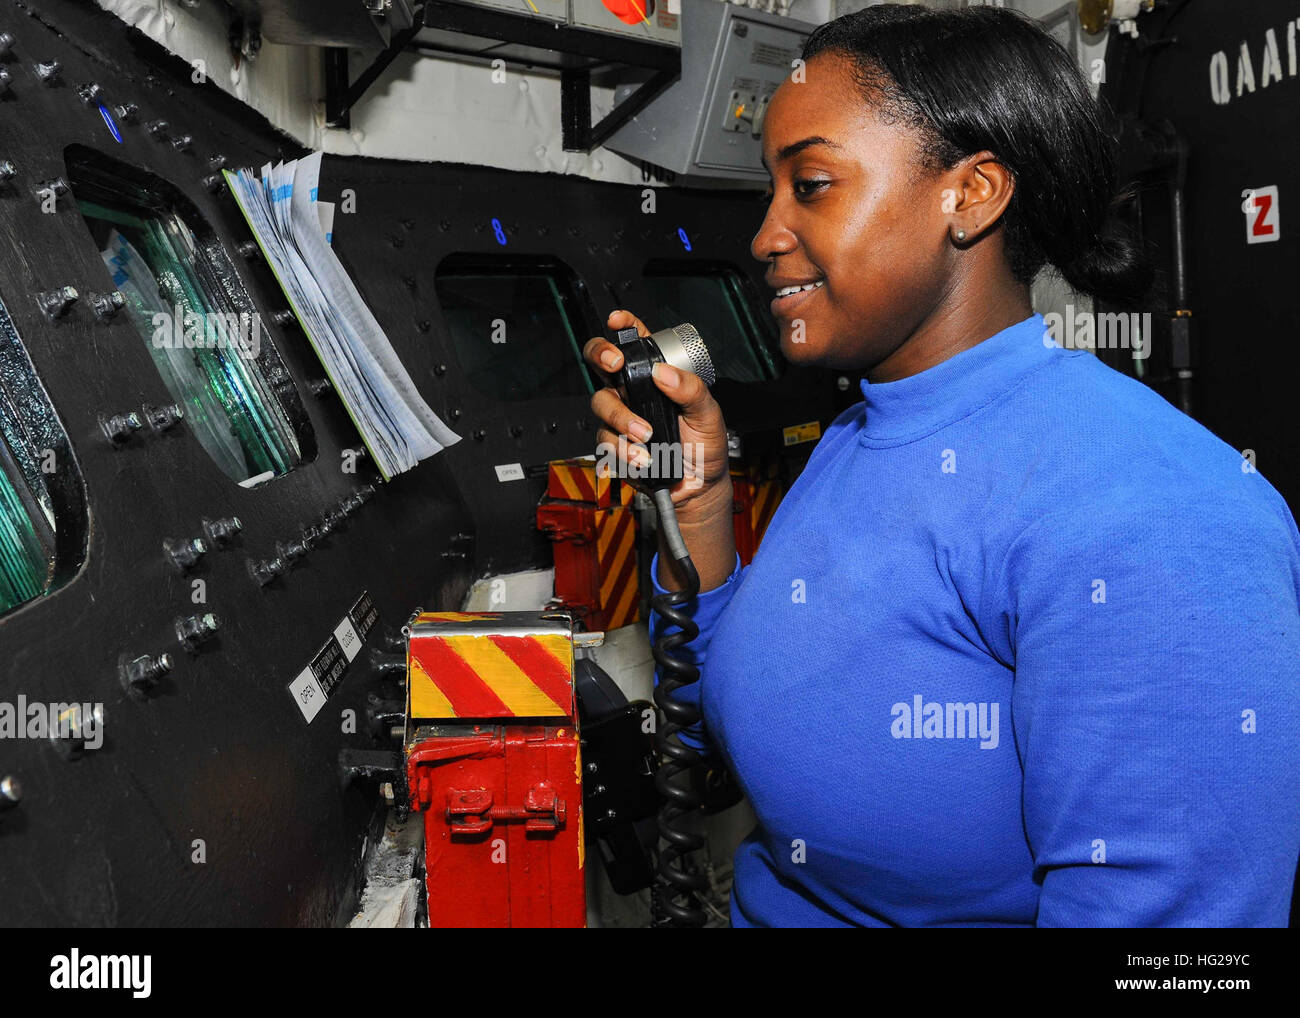 150929-N-CQ428-043  ARABIAN GULF (Sept. 29, 2015) Aviation Boatswain's Mate (Handling) Airman Naquesha Woodberry stands watch over the hangar bay in conflagration station 2 aboard the aircraft carrier USS Theodore Roosevelt (CVN 71). Theodore Roosevelt is deployed in the U.S. 5th Fleet area of operations supporting Operation Inherent Resolve, strike operations in Iraq and Syria as directed, maritime security operations and theater security cooperation efforts in the region. (U.S. Navy photo by Mass Communication Specialist 3rd Class Jennifer Case/Released) USS Theodore Roosevelt operations 150 Stock Photo